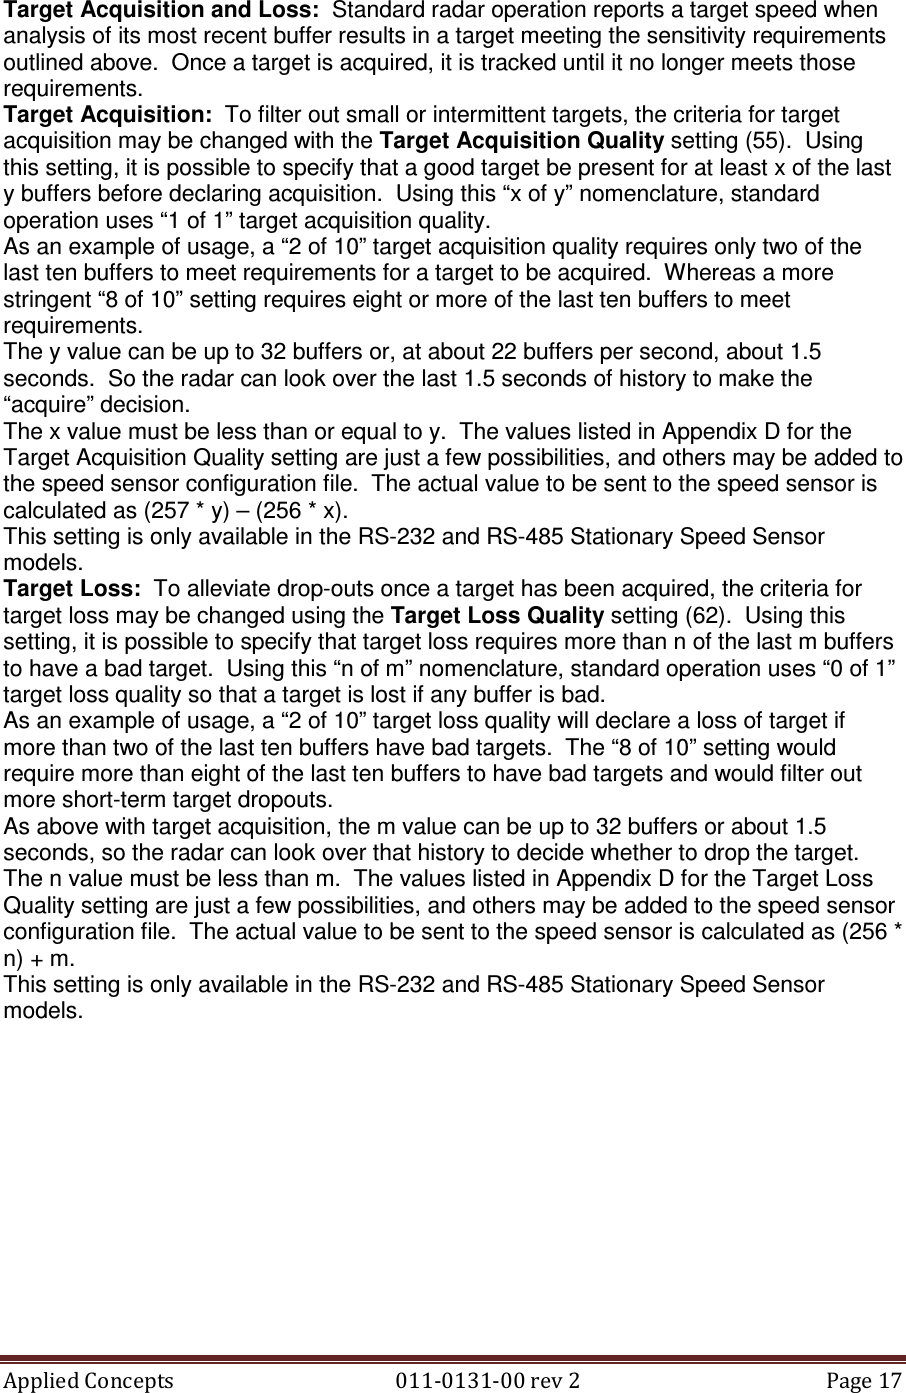 Applied Concepts                                            011-0131-00 rev 2  Page 17  Target Acquisition and Loss:  Standard radar operation reports a target speed when analysis of its most recent buffer results in a target meeting the sensitivity requirements outlined above.  Once a target is acquired, it is tracked until it no longer meets those requirements.   Target Acquisition:  To filter out small or intermittent targets, the criteria for target acquisition may be changed with the Target Acquisition Quality setting (55).  Using this setting, it is possible to specify that a good target be present for at least x of the last y buffers before declaring acquisition.  Using this “x of y” nomenclature, standard operation uses “1 of 1” target acquisition quality. As an example of usage, a “2 of 10” target acquisition quality requires only two of the last ten buffers to meet requirements for a target to be acquired.  Whereas a more stringent “8 of 10” setting requires eight or more of the last ten buffers to meet requirements. The y value can be up to 32 buffers or, at about 22 buffers per second, about 1.5 seconds.  So the radar can look over the last 1.5 seconds of history to make the “acquire” decision. The x value must be less than or equal to y.  The values listed in Appendix D for the Target Acquisition Quality setting are just a few possibilities, and others may be added to the speed sensor configuration file.  The actual value to be sent to the speed sensor is calculated as (257 * y) – (256 * x). This setting is only available in the RS-232 and RS-485 Stationary Speed Sensor models. Target Loss:  To alleviate drop-outs once a target has been acquired, the criteria for target loss may be changed using the Target Loss Quality setting (62).  Using this setting, it is possible to specify that target loss requires more than n of the last m buffers to have a bad target.  Using this “n of m” nomenclature, standard operation uses “0 of 1” target loss quality so that a target is lost if any buffer is bad. As an example of usage, a “2 of 10” target loss quality will declare a loss of target if more than two of the last ten buffers have bad targets.  The “8 of 10” setting would require more than eight of the last ten buffers to have bad targets and would filter out more short-term target dropouts. As above with target acquisition, the m value can be up to 32 buffers or about 1.5 seconds, so the radar can look over that history to decide whether to drop the target. The n value must be less than m.  The values listed in Appendix D for the Target Loss Quality setting are just a few possibilities, and others may be added to the speed sensor configuration file.  The actual value to be sent to the speed sensor is calculated as (256 * n) + m. This setting is only available in the RS-232 and RS-485 Stationary Speed Sensor models.  